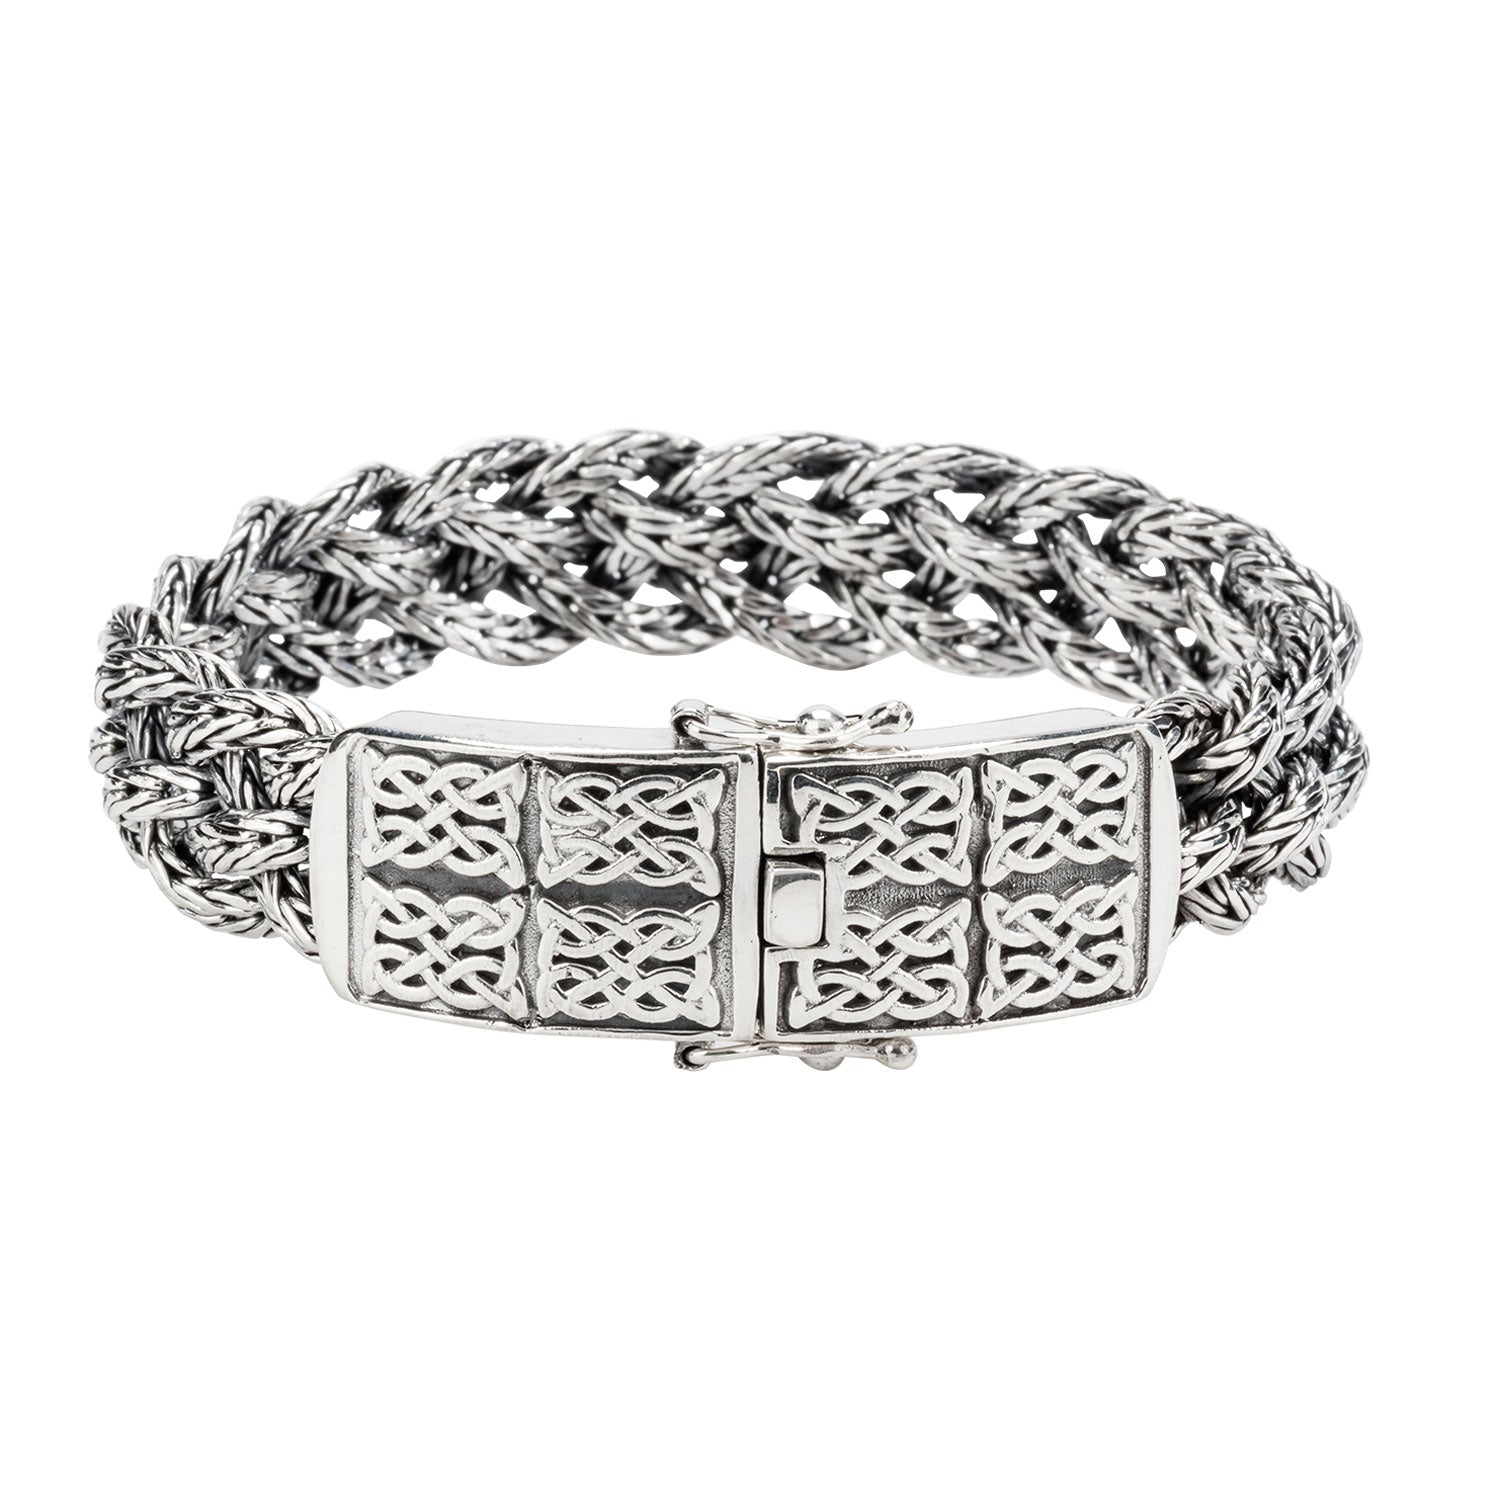 Bracelet Norse Forge Dragon Weave Bracelet from welch and company jewelers near syracuse ny 